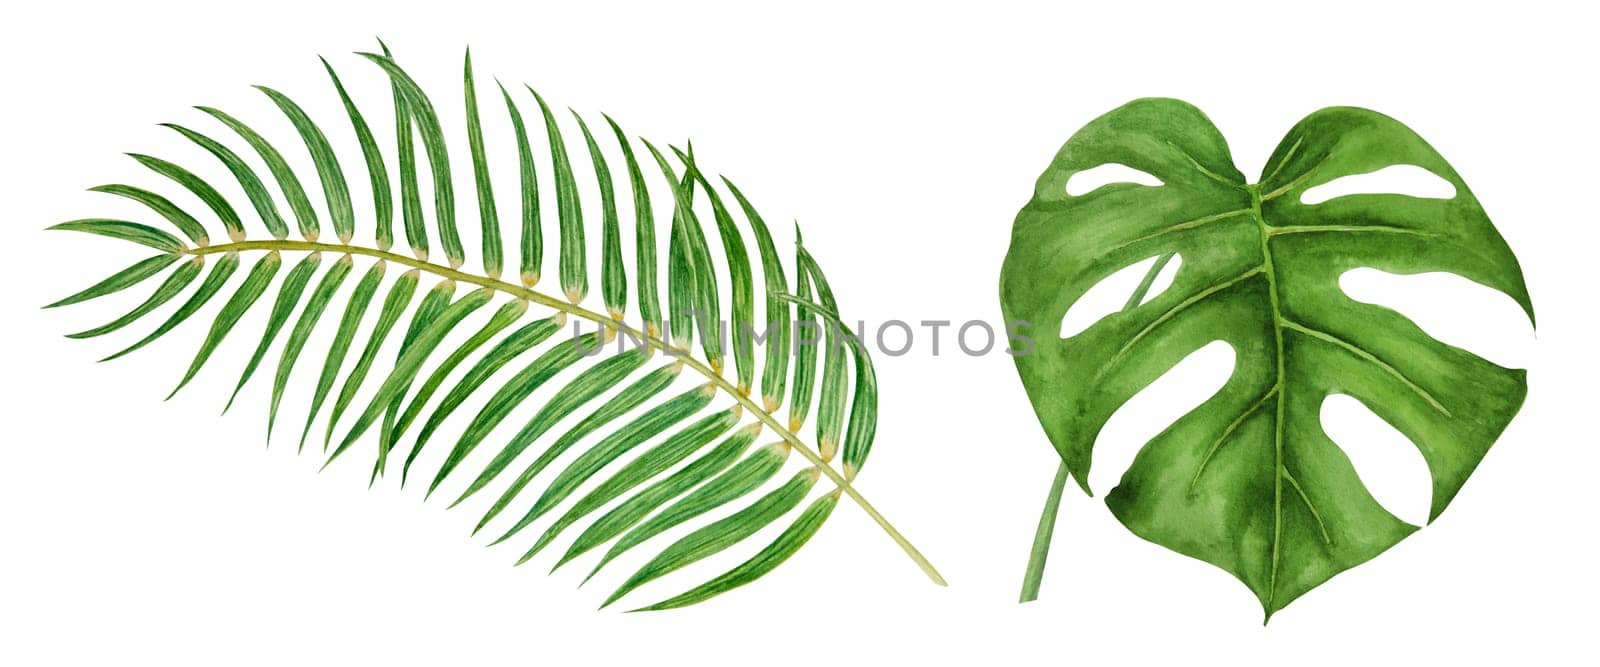 Green Monstera leaf. Watercolor hand drawn illustration of tropical plant for travel guides, cosmetic, spa, massage salon prints, wedding invitations, cards, textile, packing. Jungle liana clip art